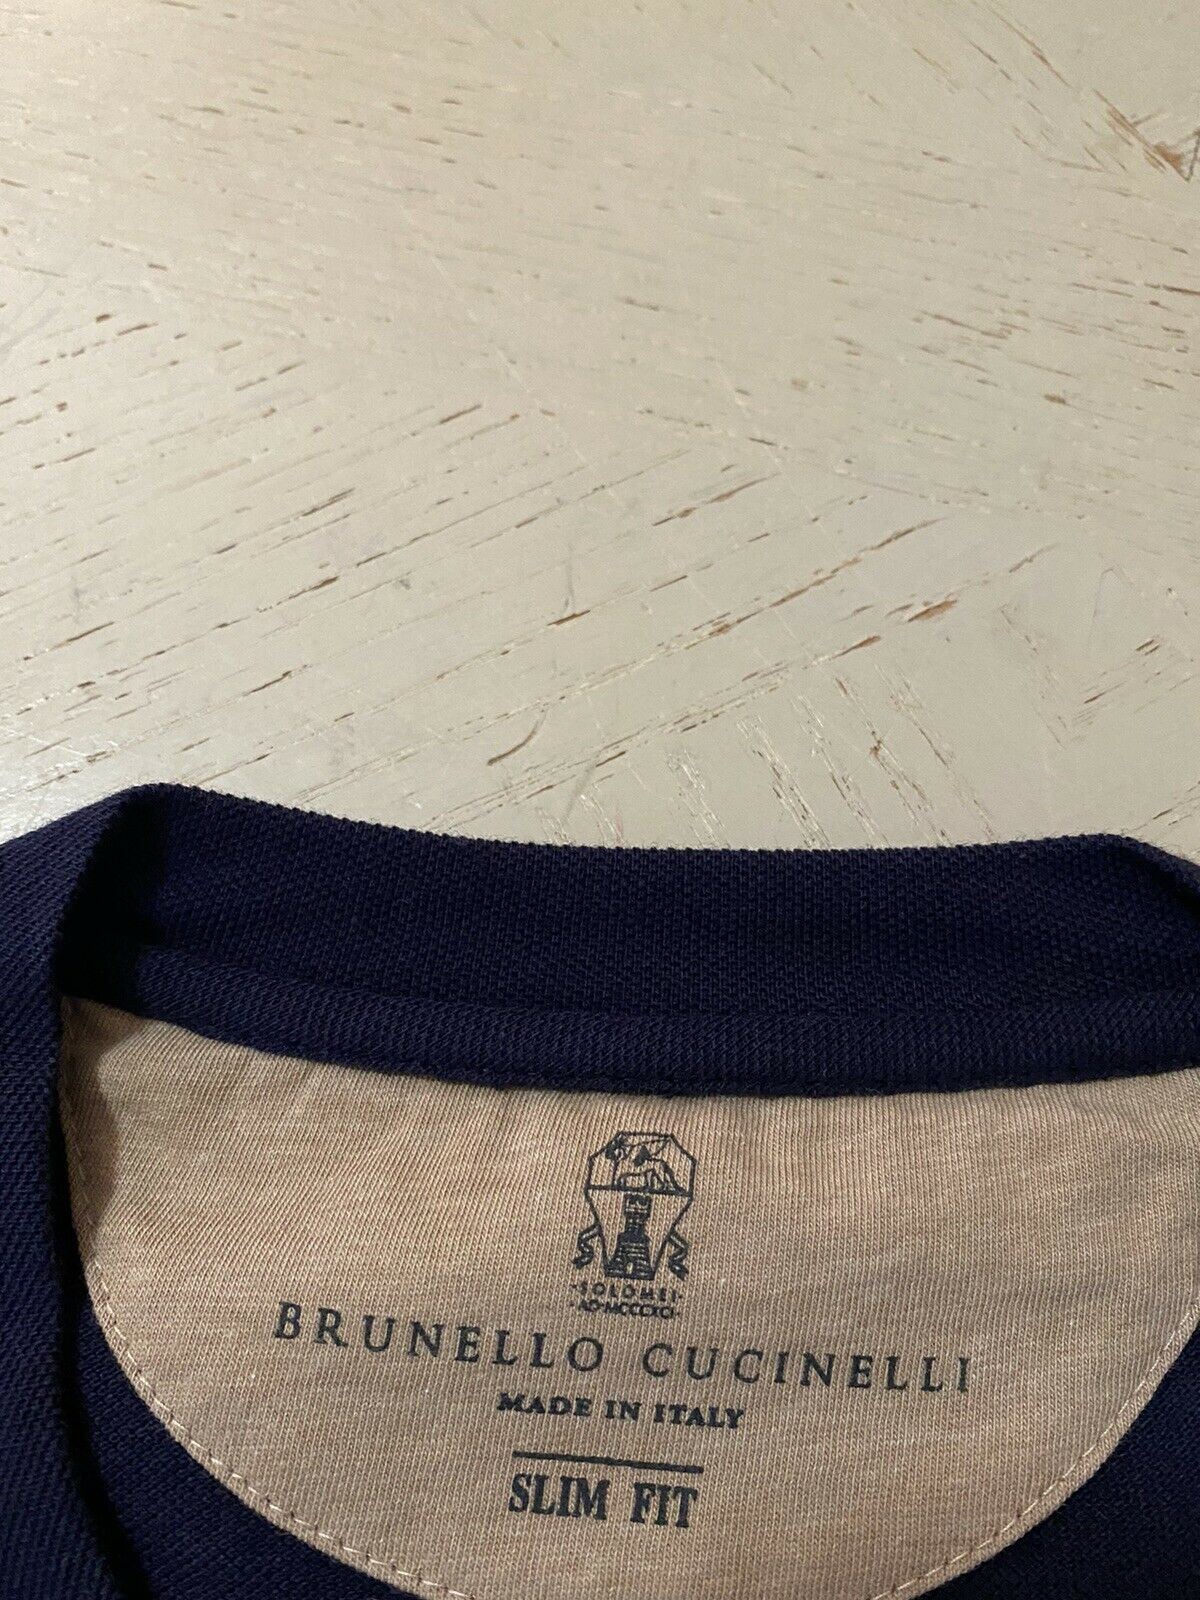 New $575 Brunello Cucinelli Men’s T Shirt Blue/Brown Size S Italy